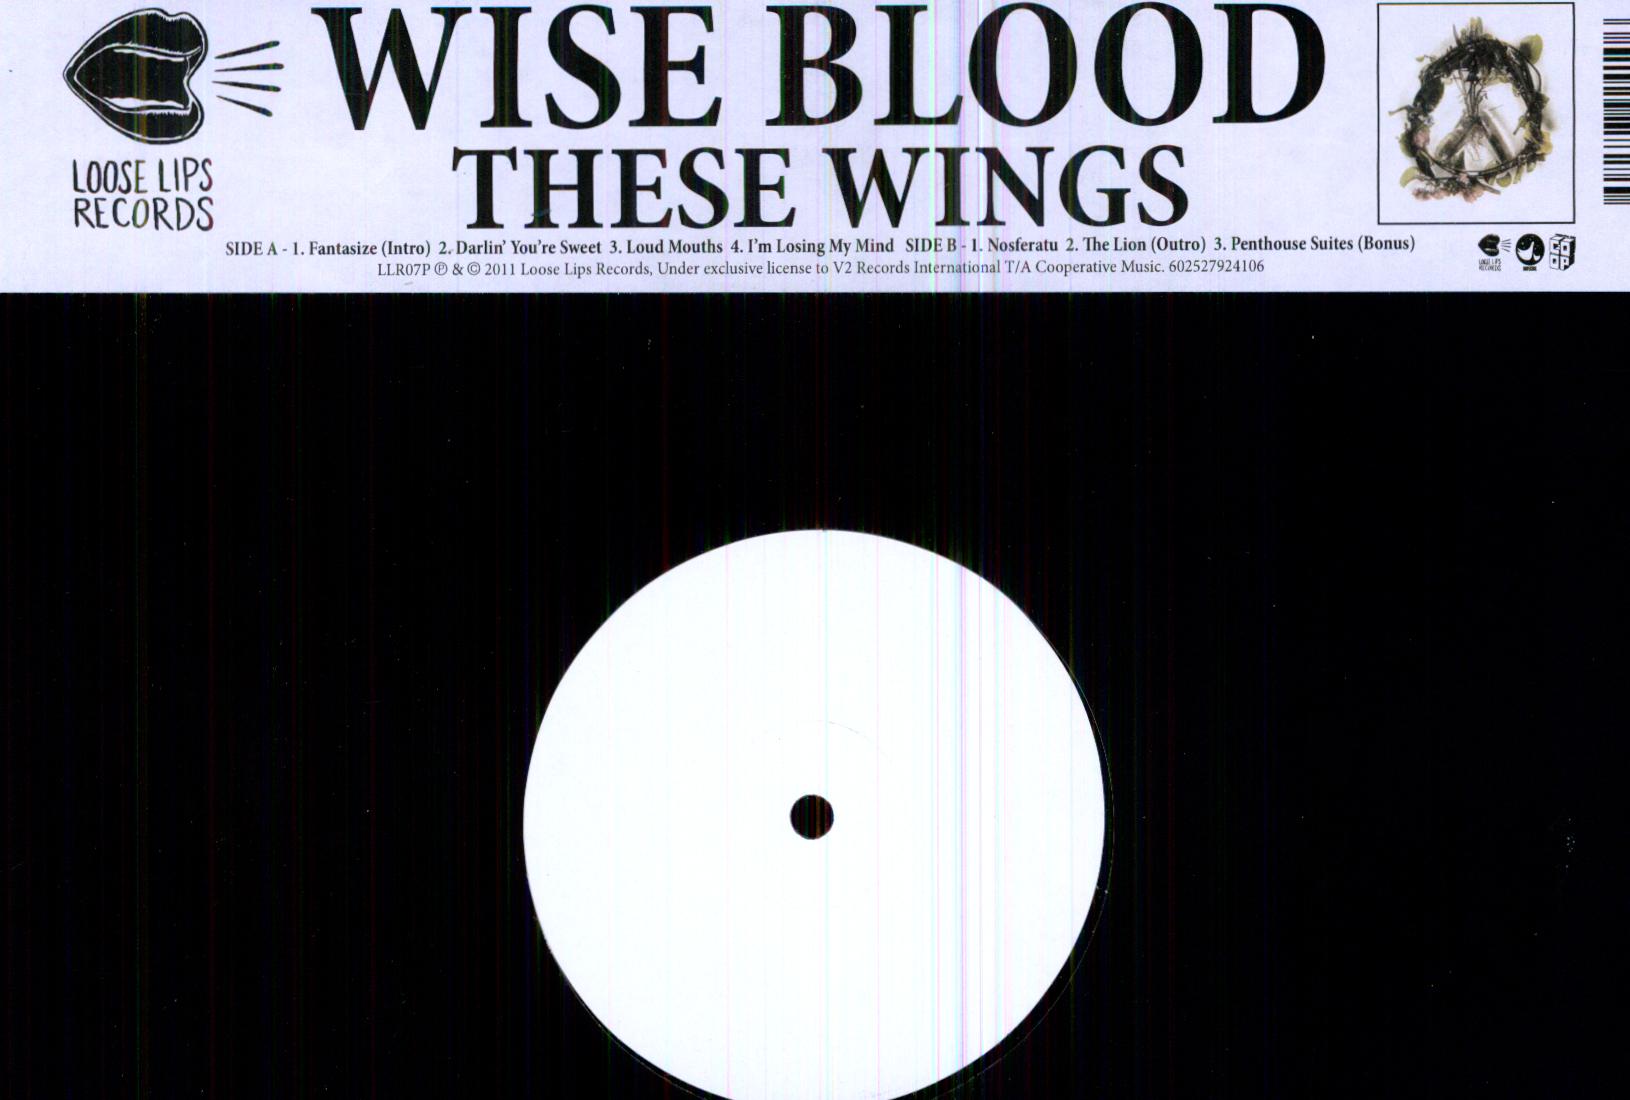 THESE WINGS EP (UK)